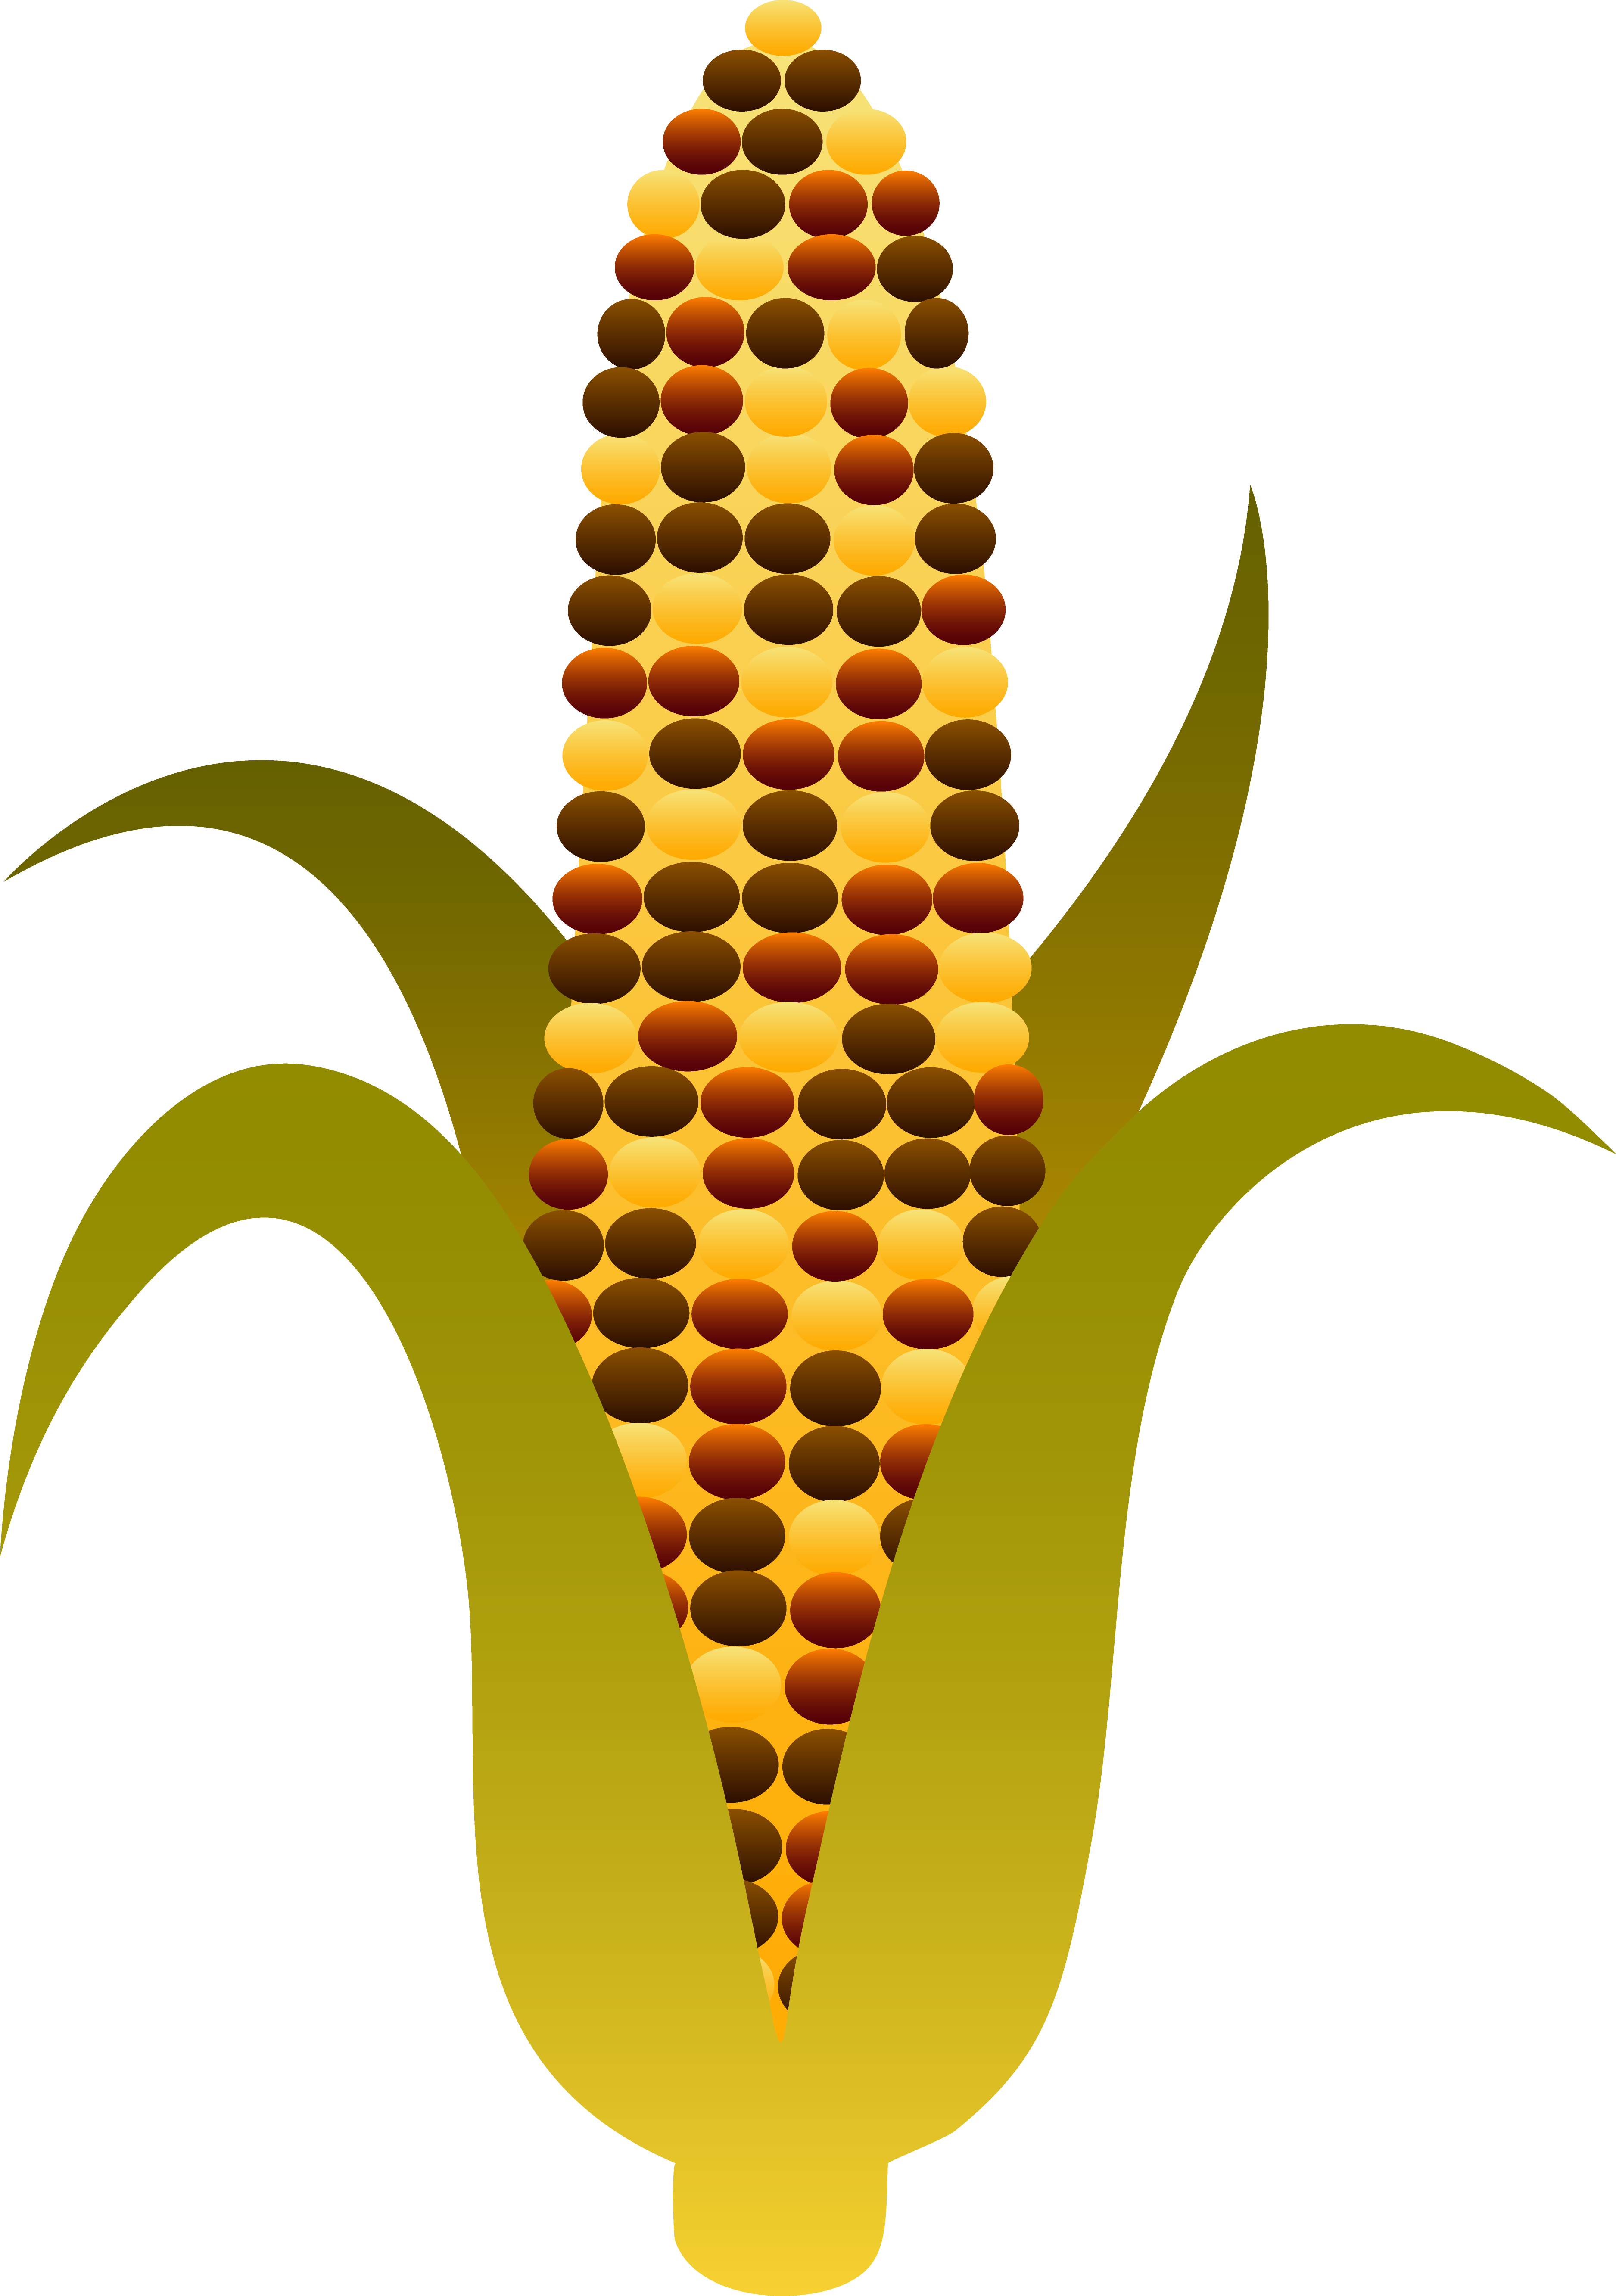 Indian harvest corn maize. Photograph clipart pictorial directory